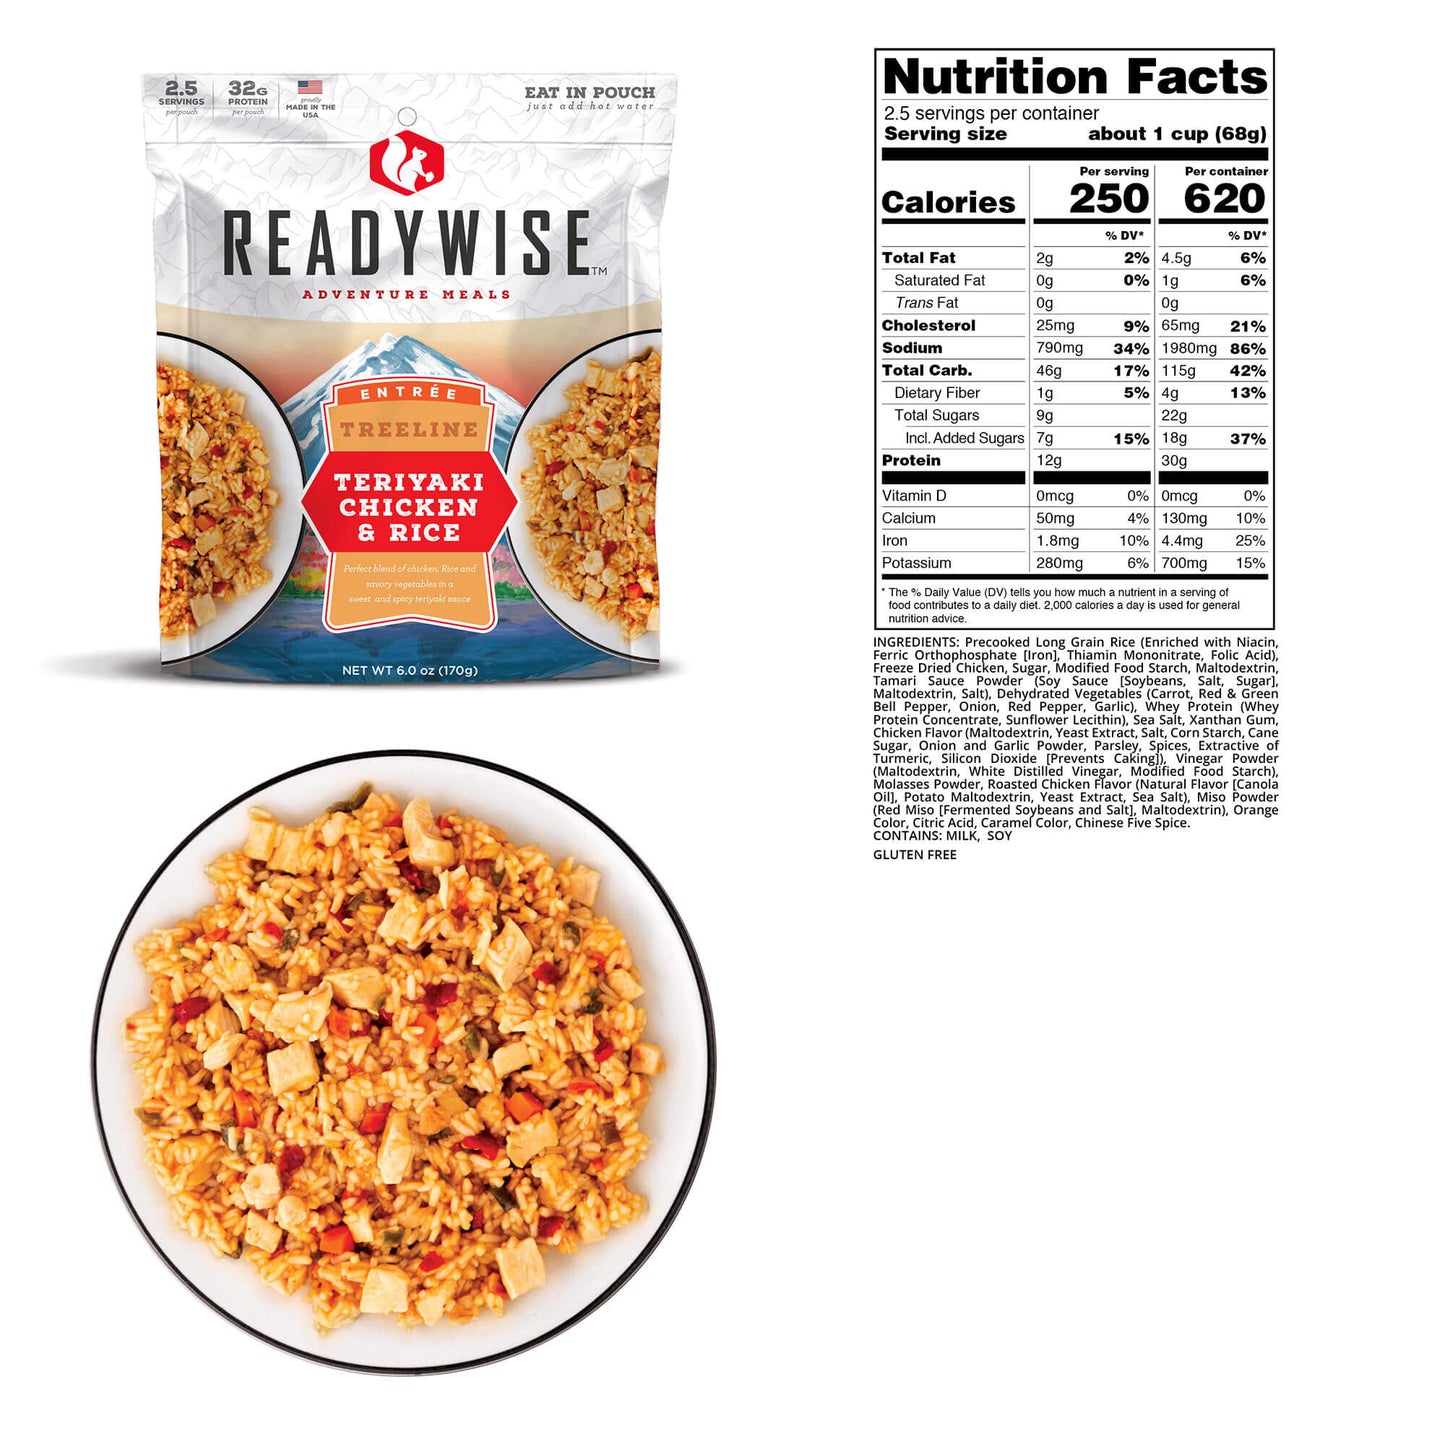 readywise adventure meals 3 day adventure kit with dry bag teriyaki chicken and rice nutritional information